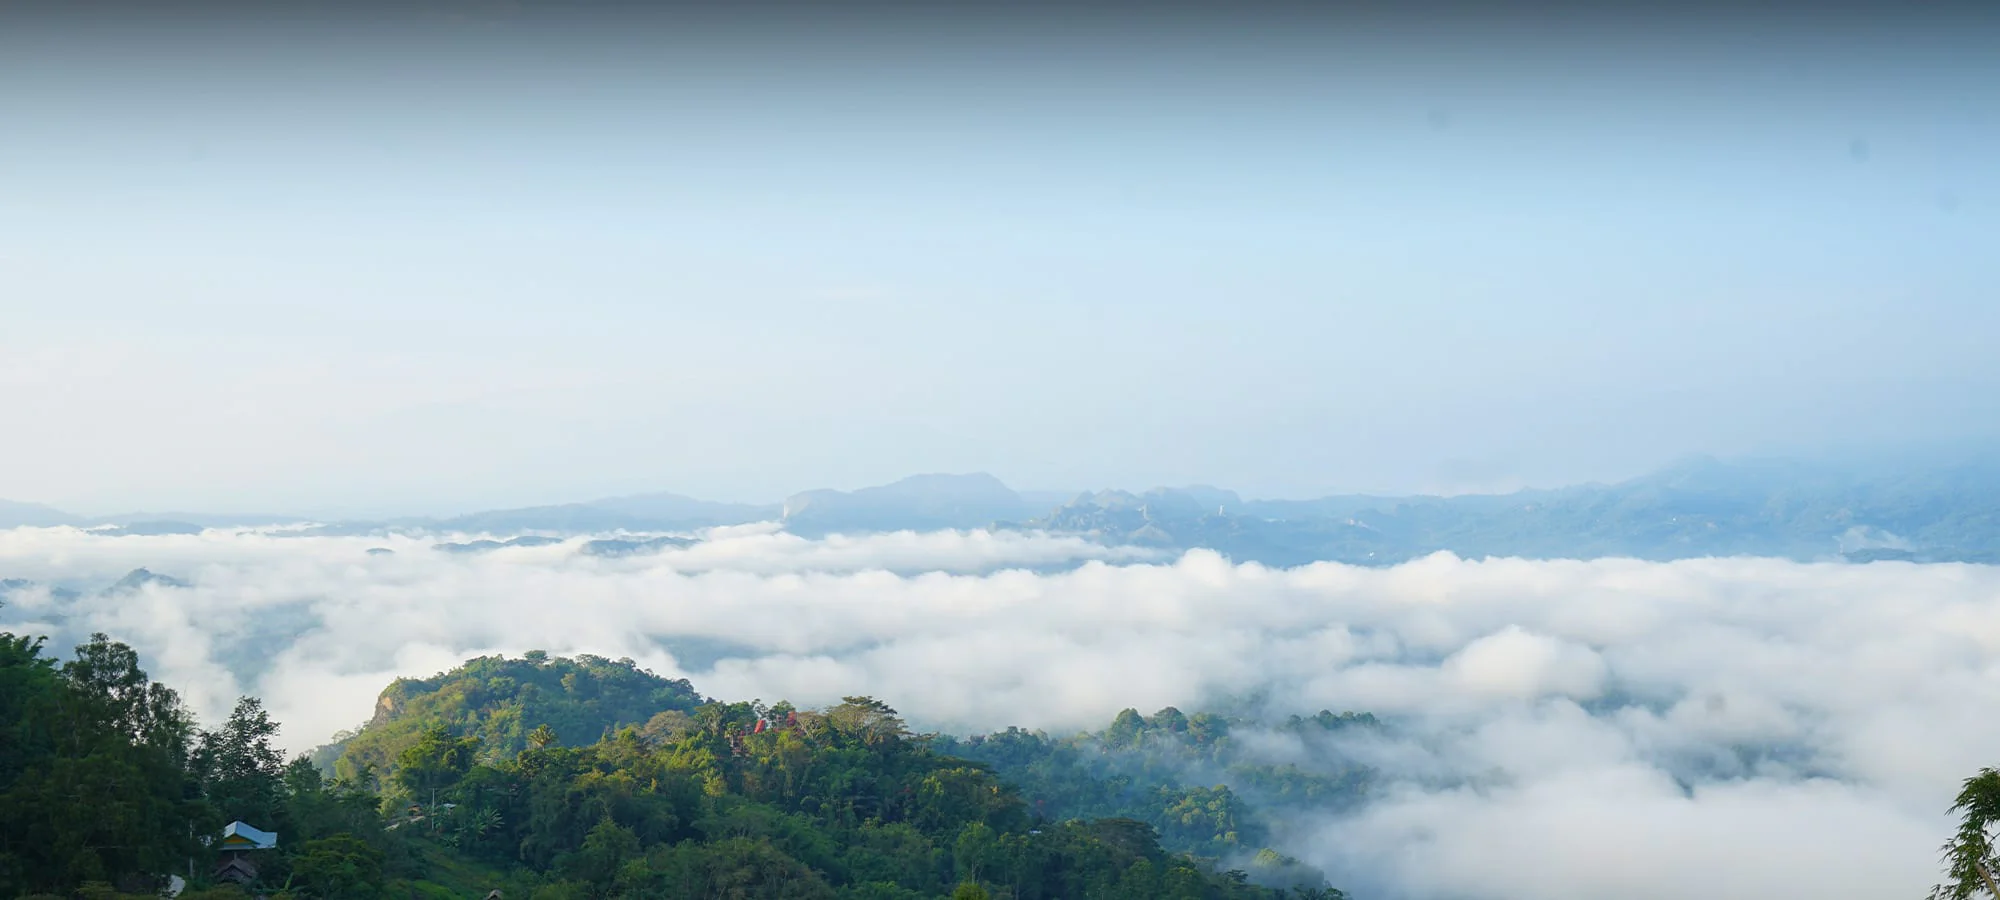 Indonesian mountain jungles looking down over a cloud filled valley